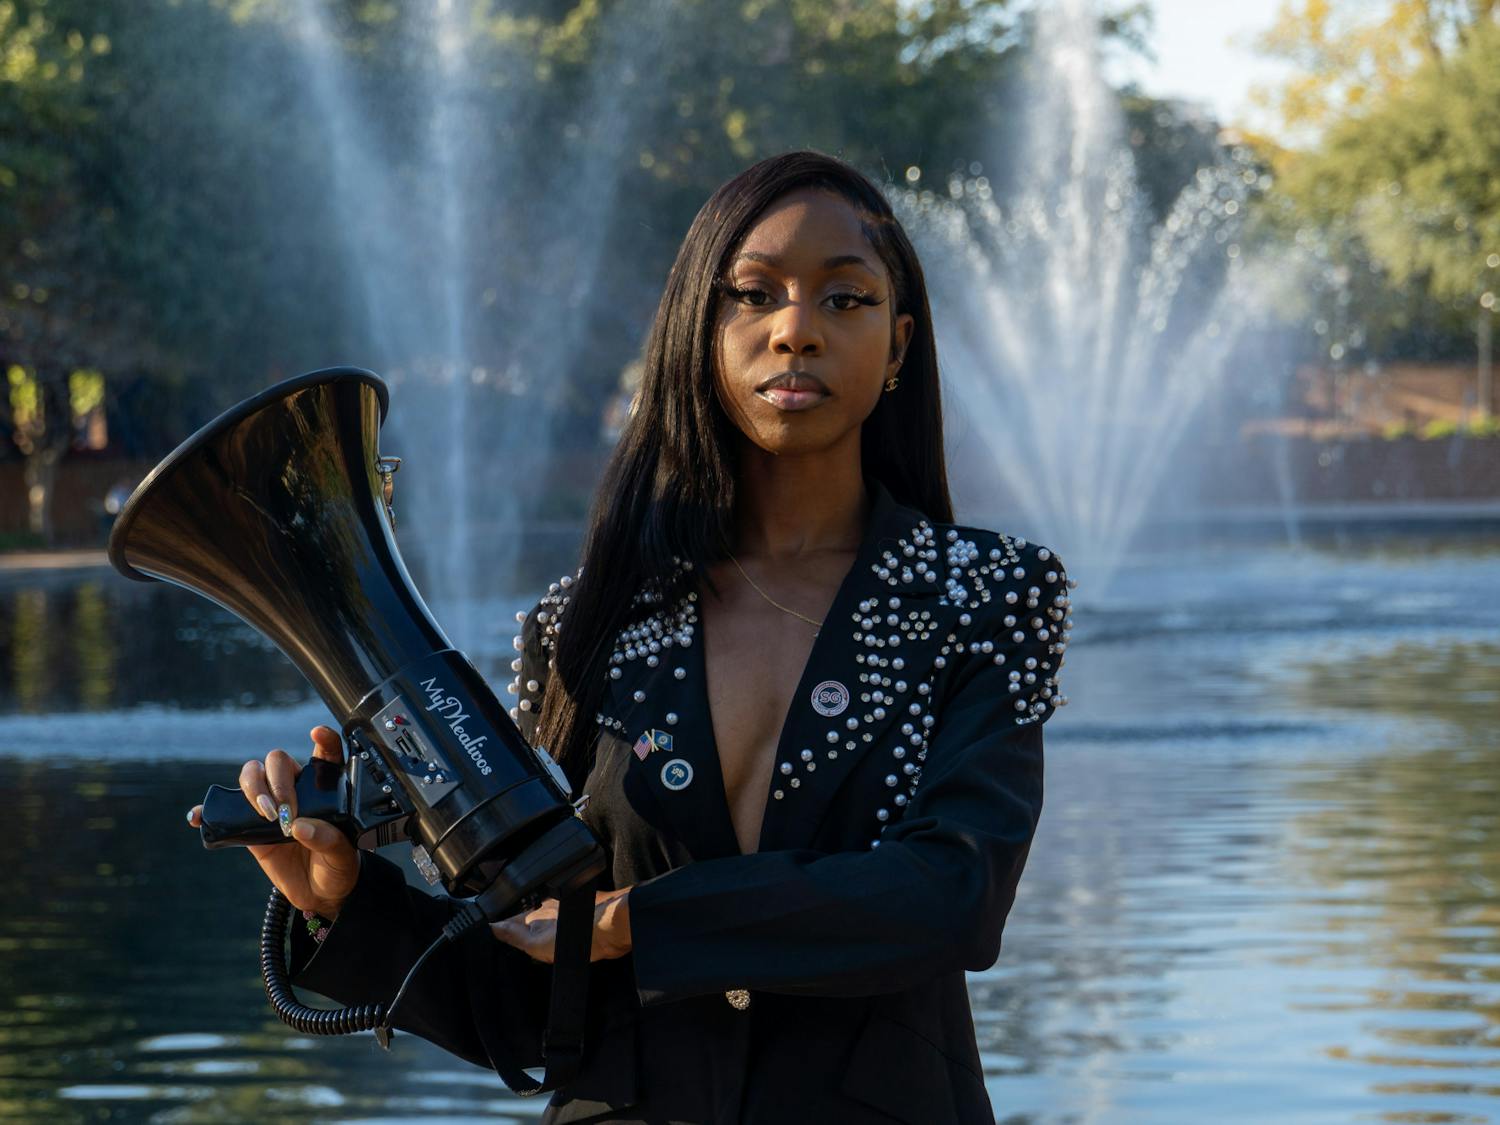 Fourth-year broadcast journalism student Courtney McClain poses with her megaphone outside the Thomas Cooper Library on Oct. 24, 2022. The junior lobbyist participates and organizes marches and events to combat the mistreatment of minorities, LGBTQIA+ groups and other groups that face discrimination.